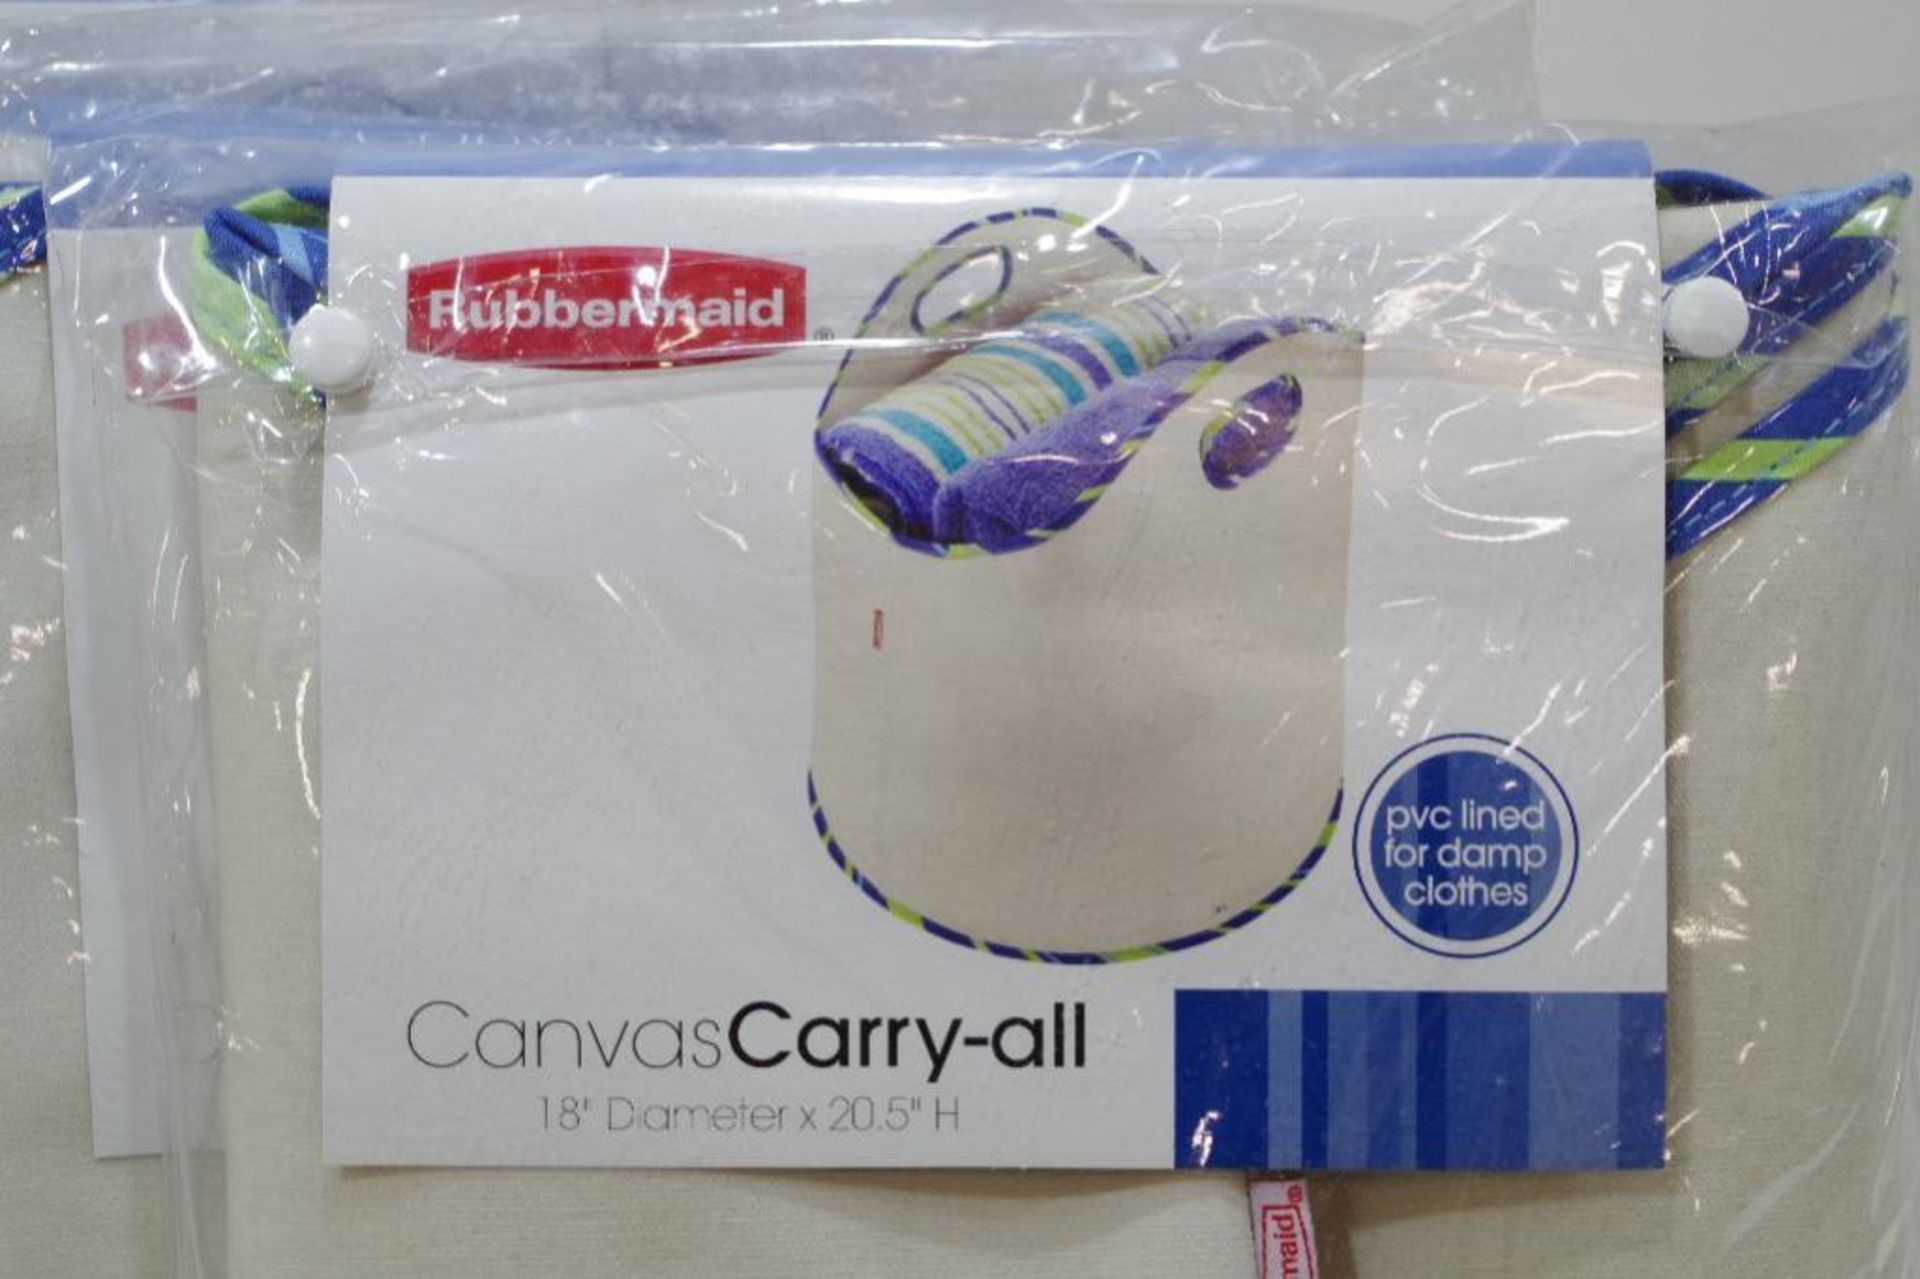 (5) NEW RUBBERMAID Canvas Carry-all Laundry Totes, Approx. 18" Dia. x 20.5" H